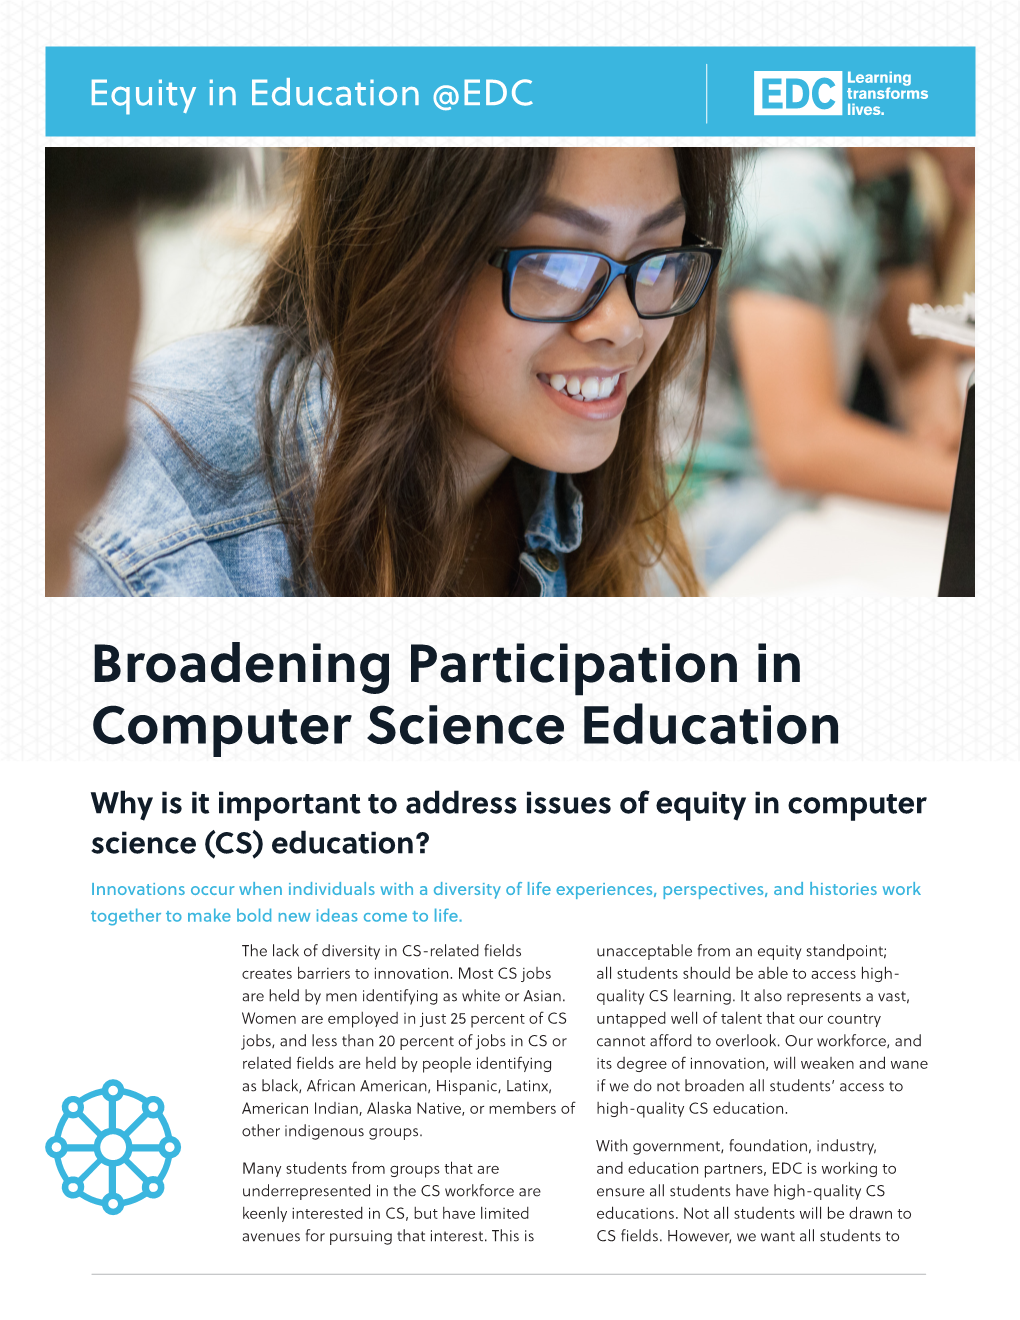 Broadening Participation in Computer Science Education